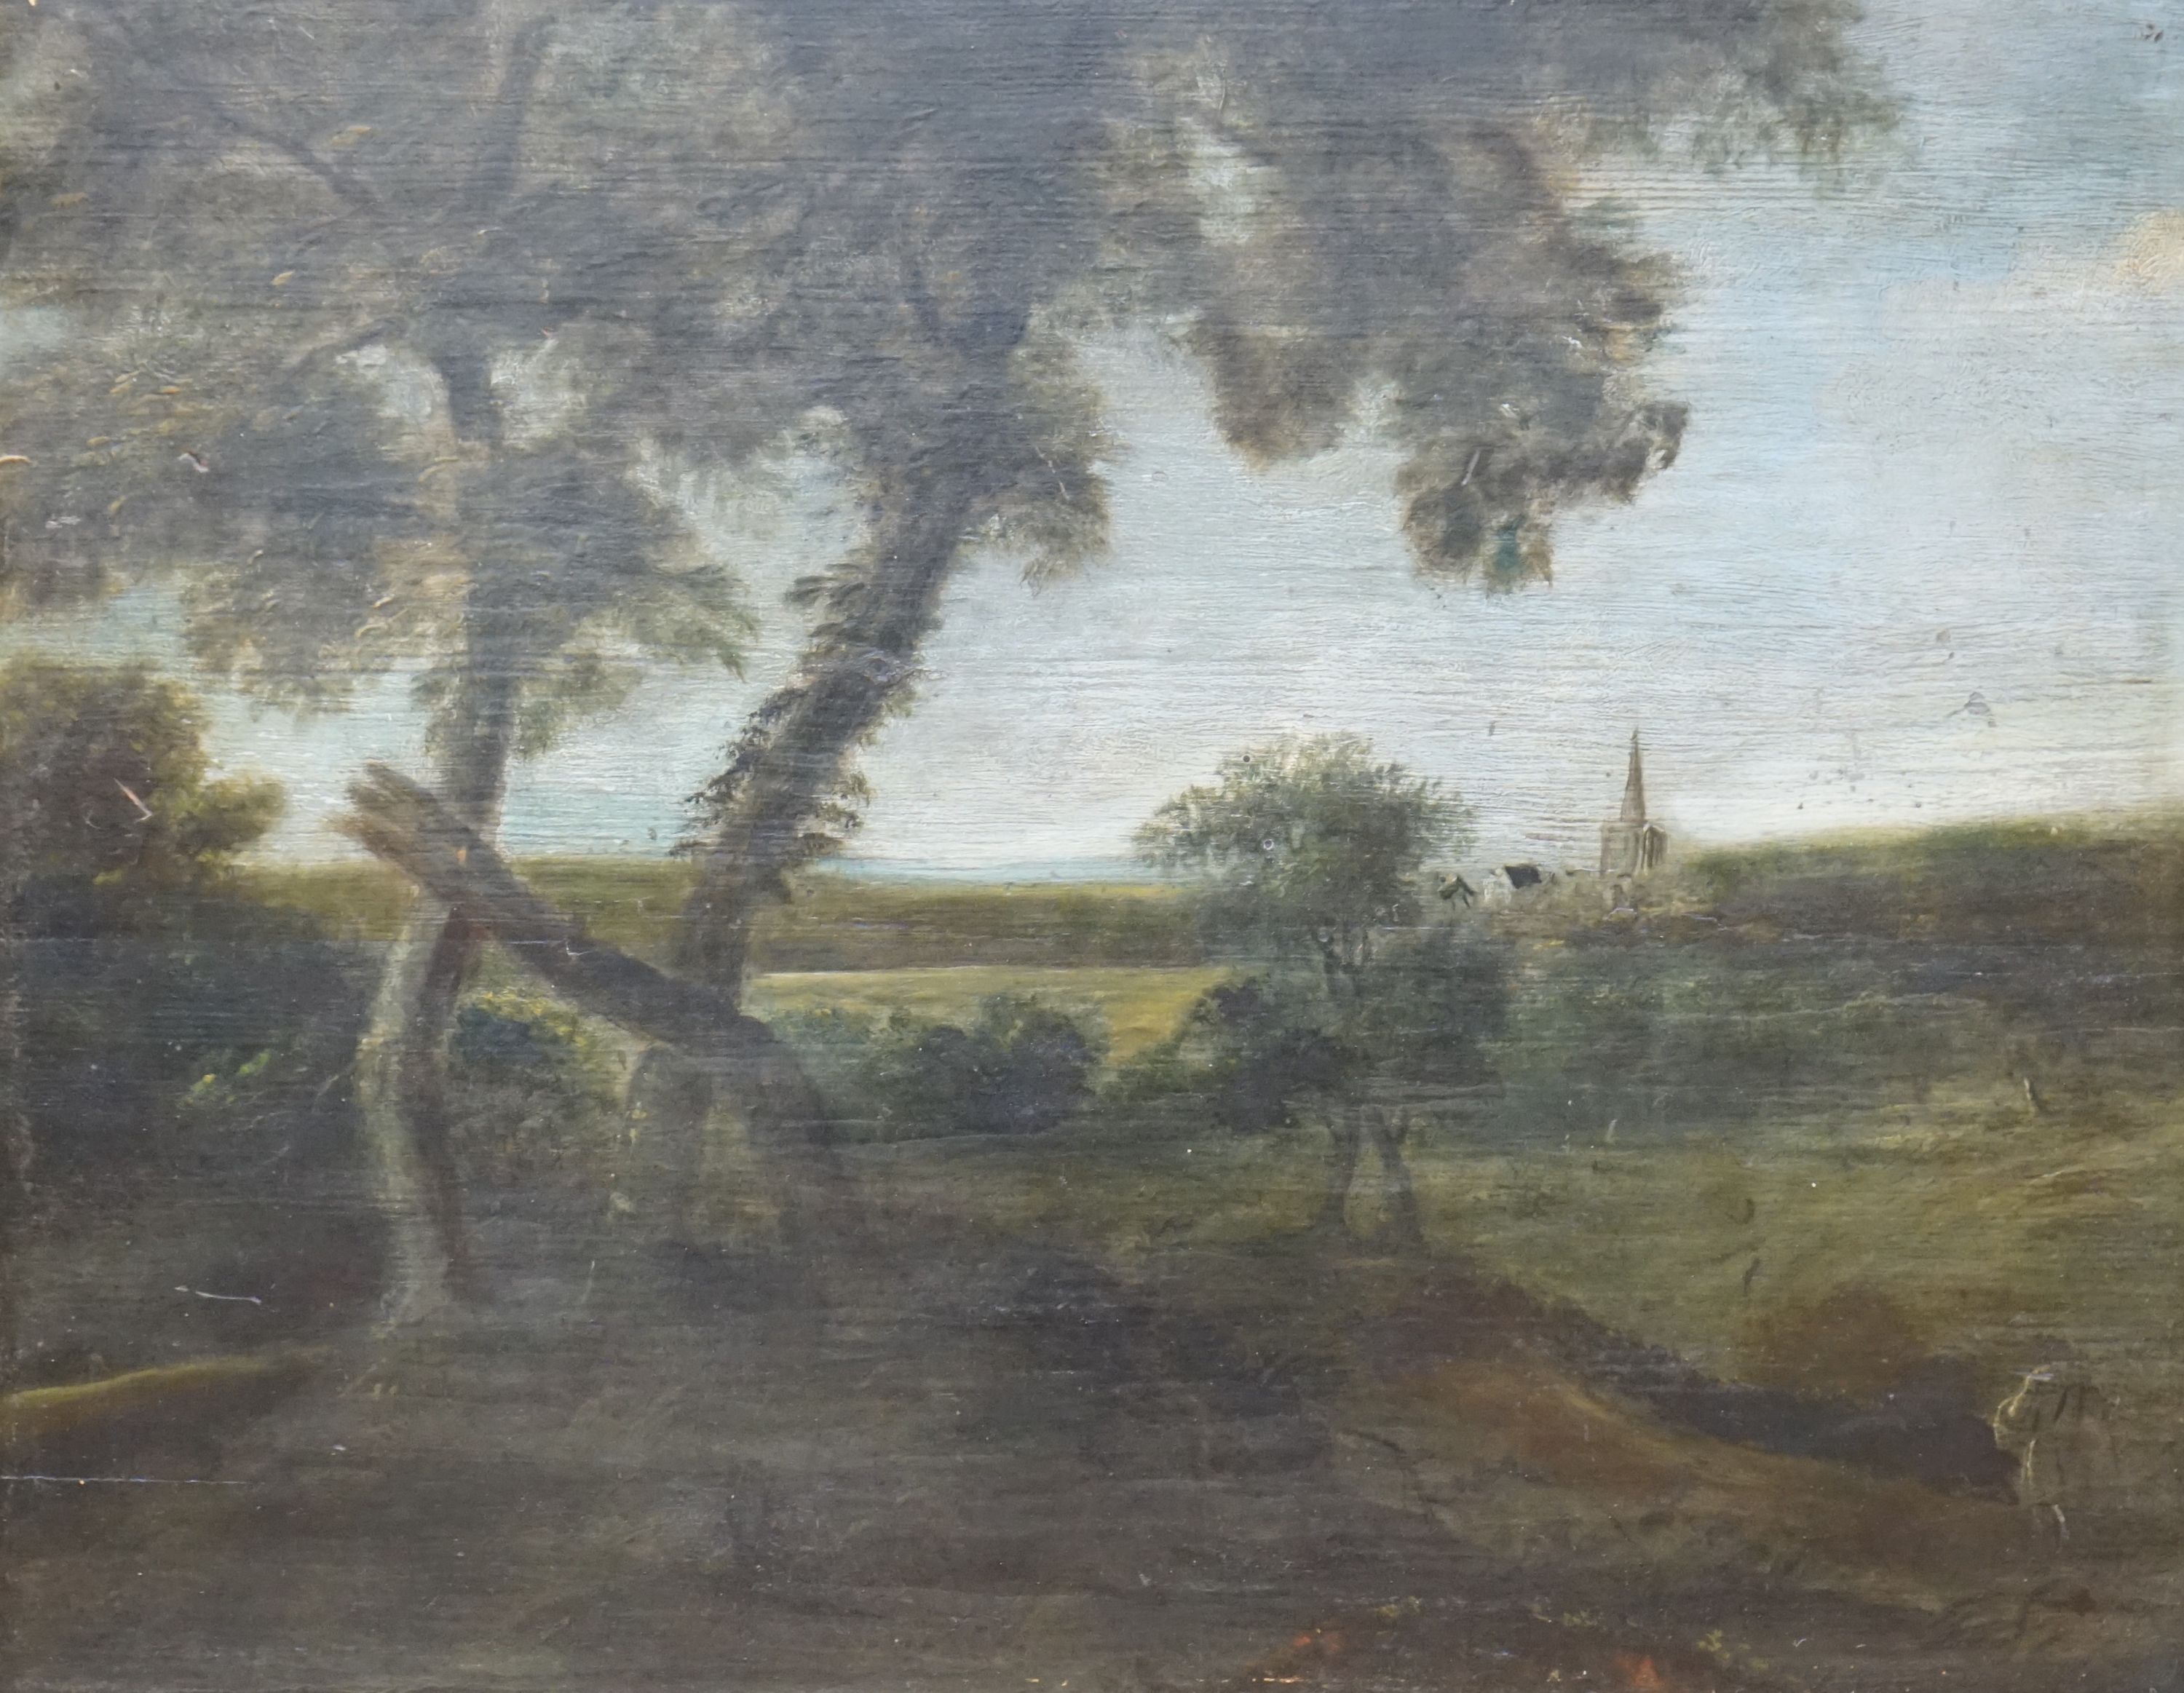 19th century English School, oil on wooden panel, Traveller and church in a landscape, 40 x 50cm